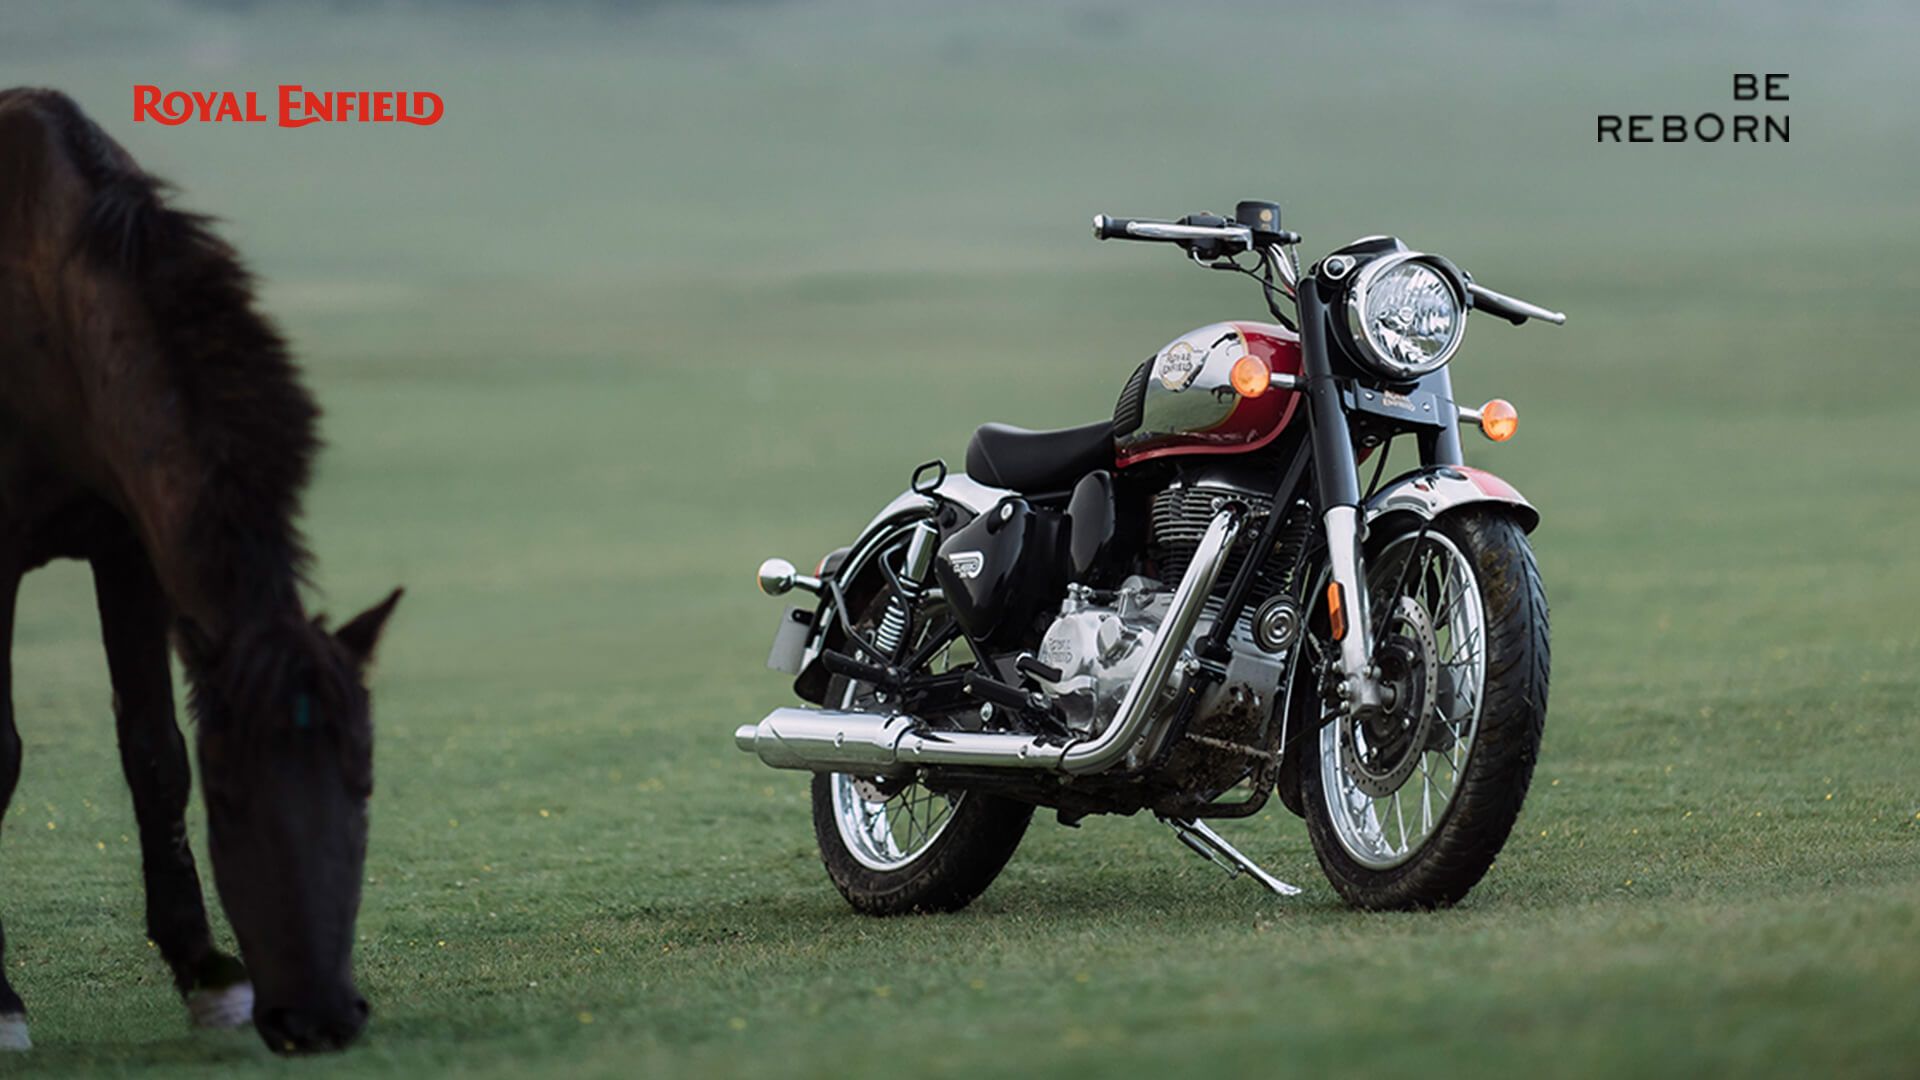 Royal Enfield 350 Classic with a horse in a field